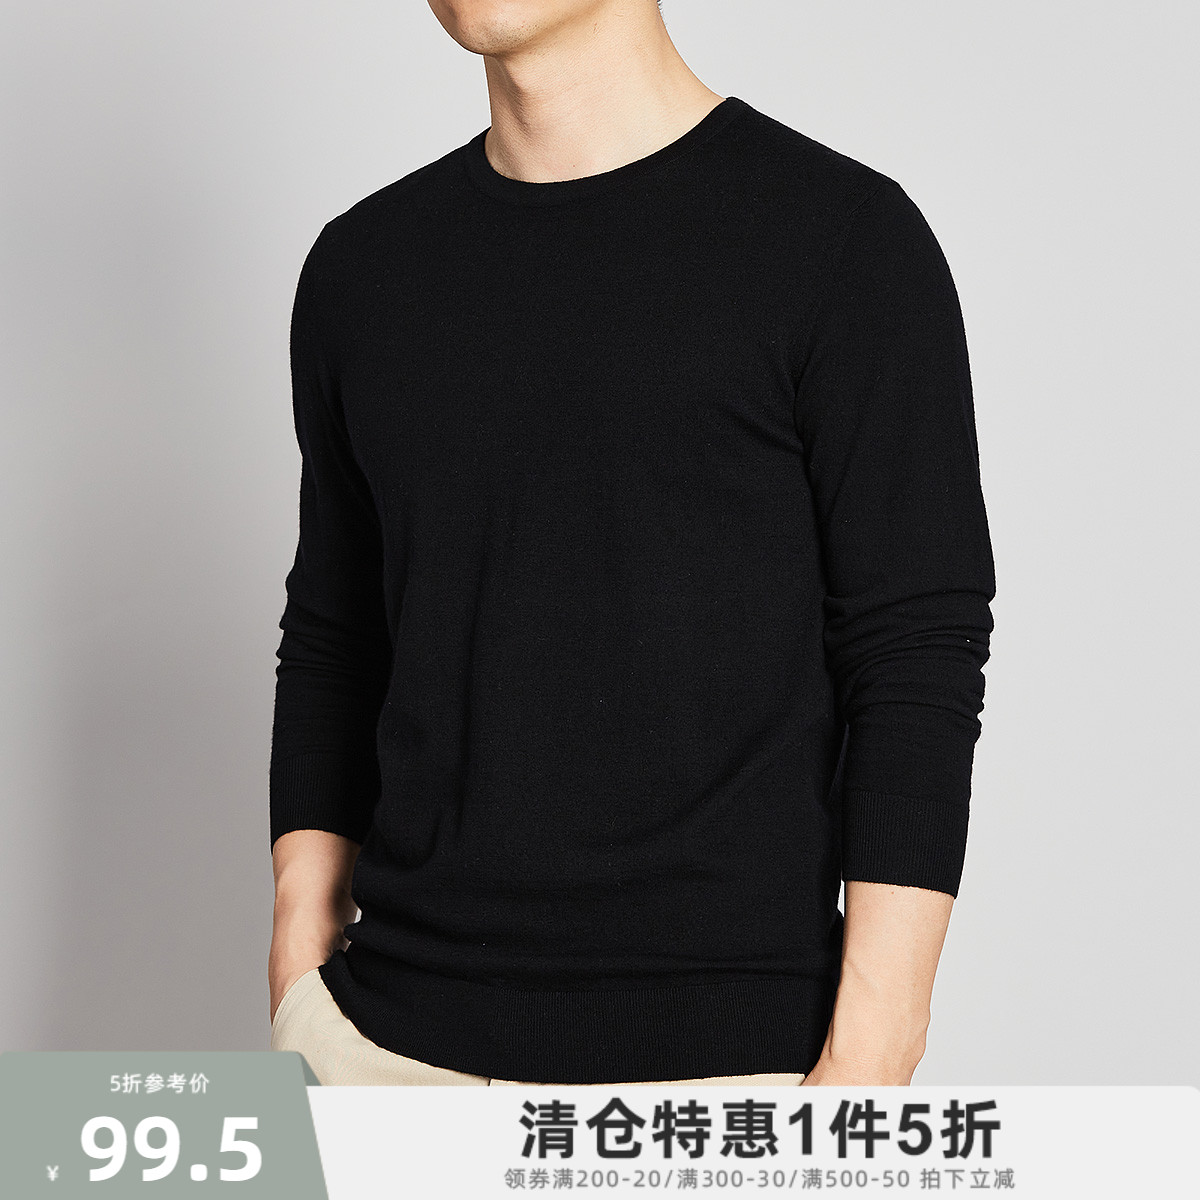 (spring and summer 5 discount) The new pure wool combined thin section male pure color long sleeve round neckline goat sweatshirt minimalist